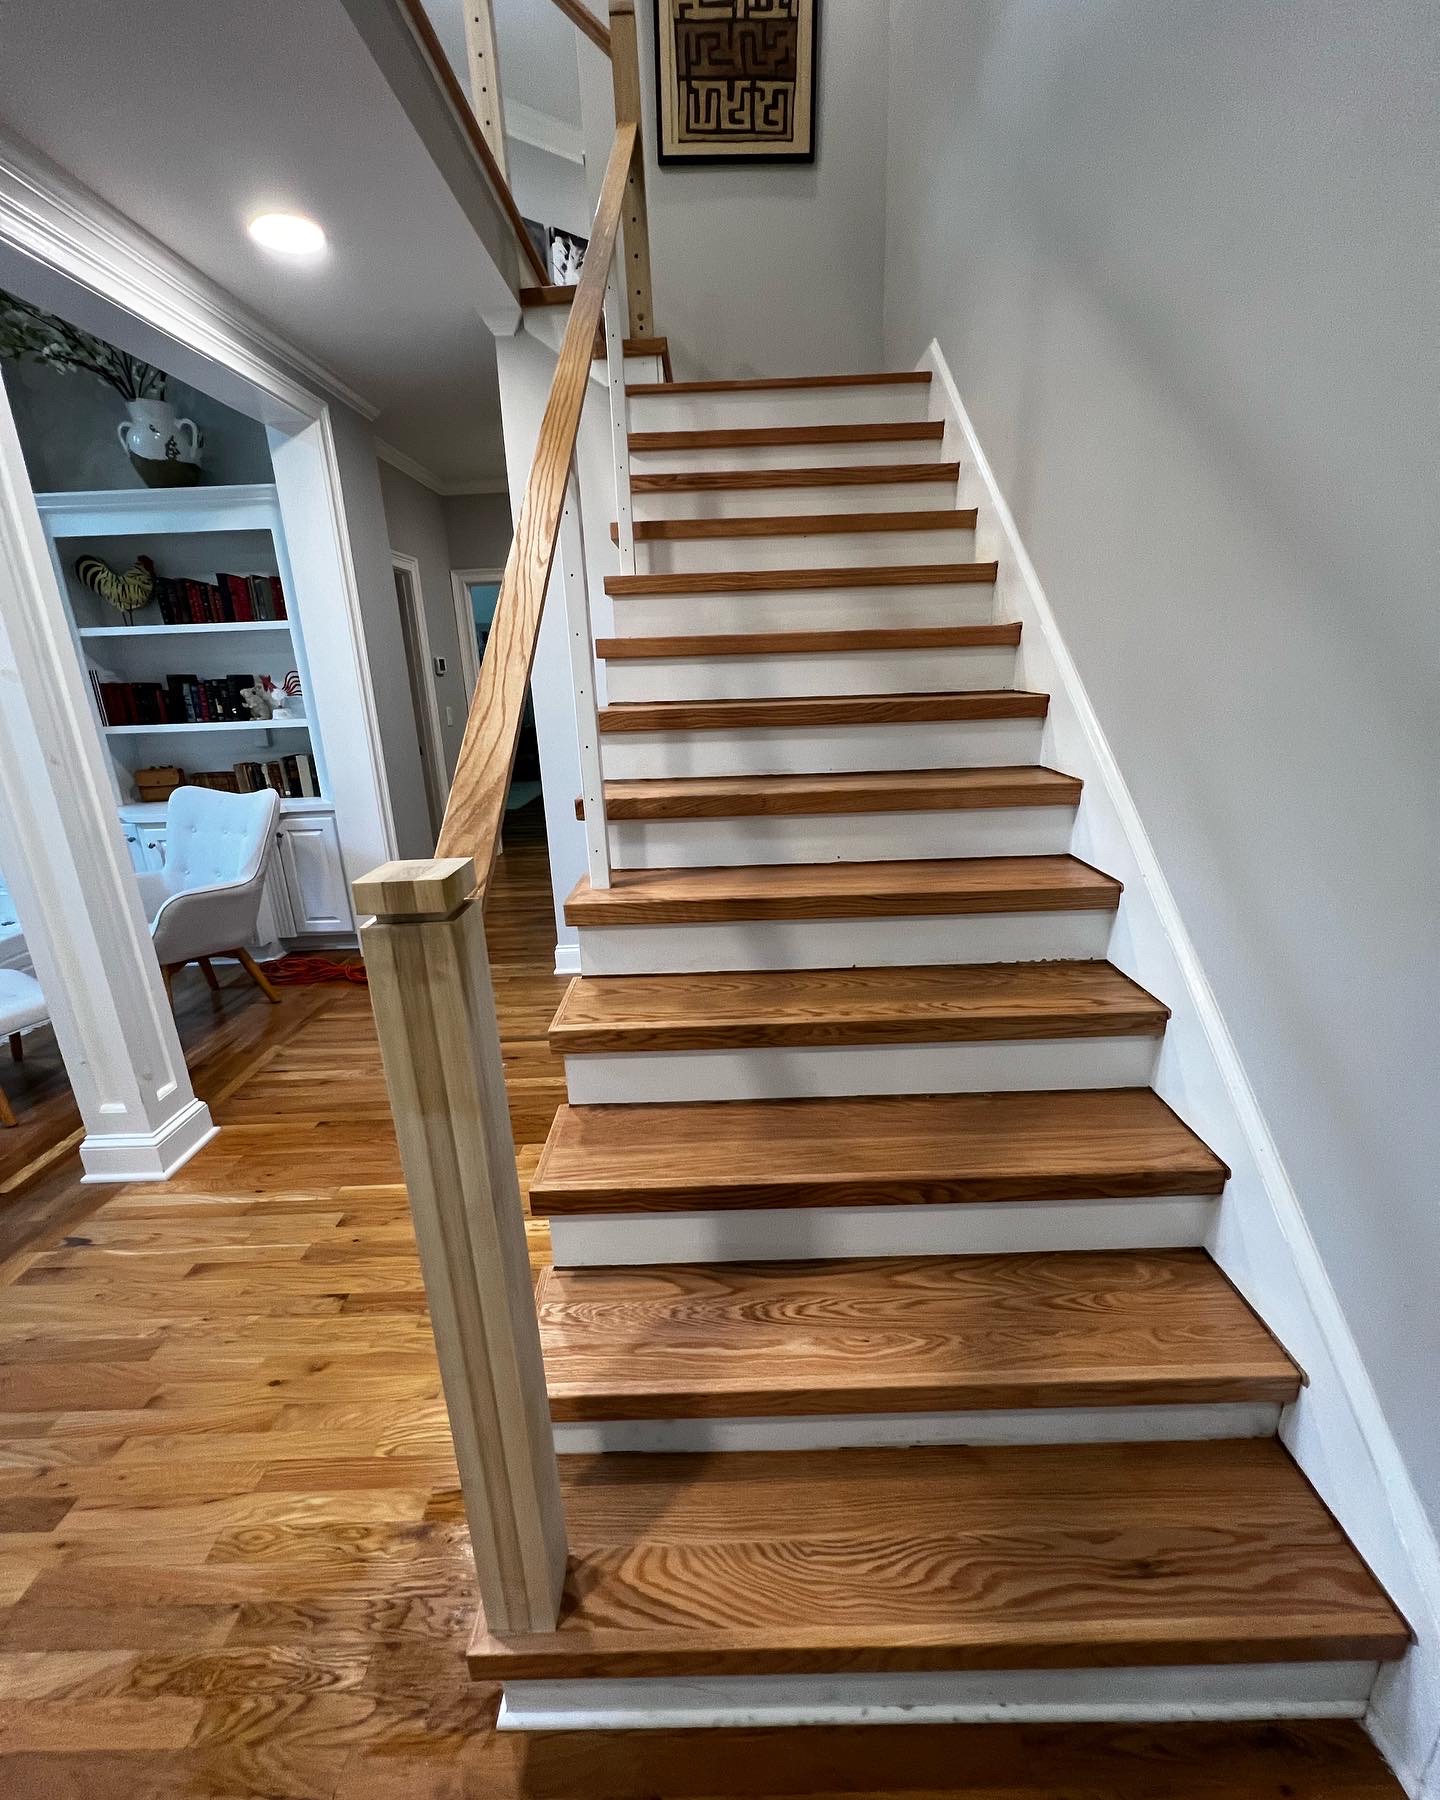 which wood is best for stairs